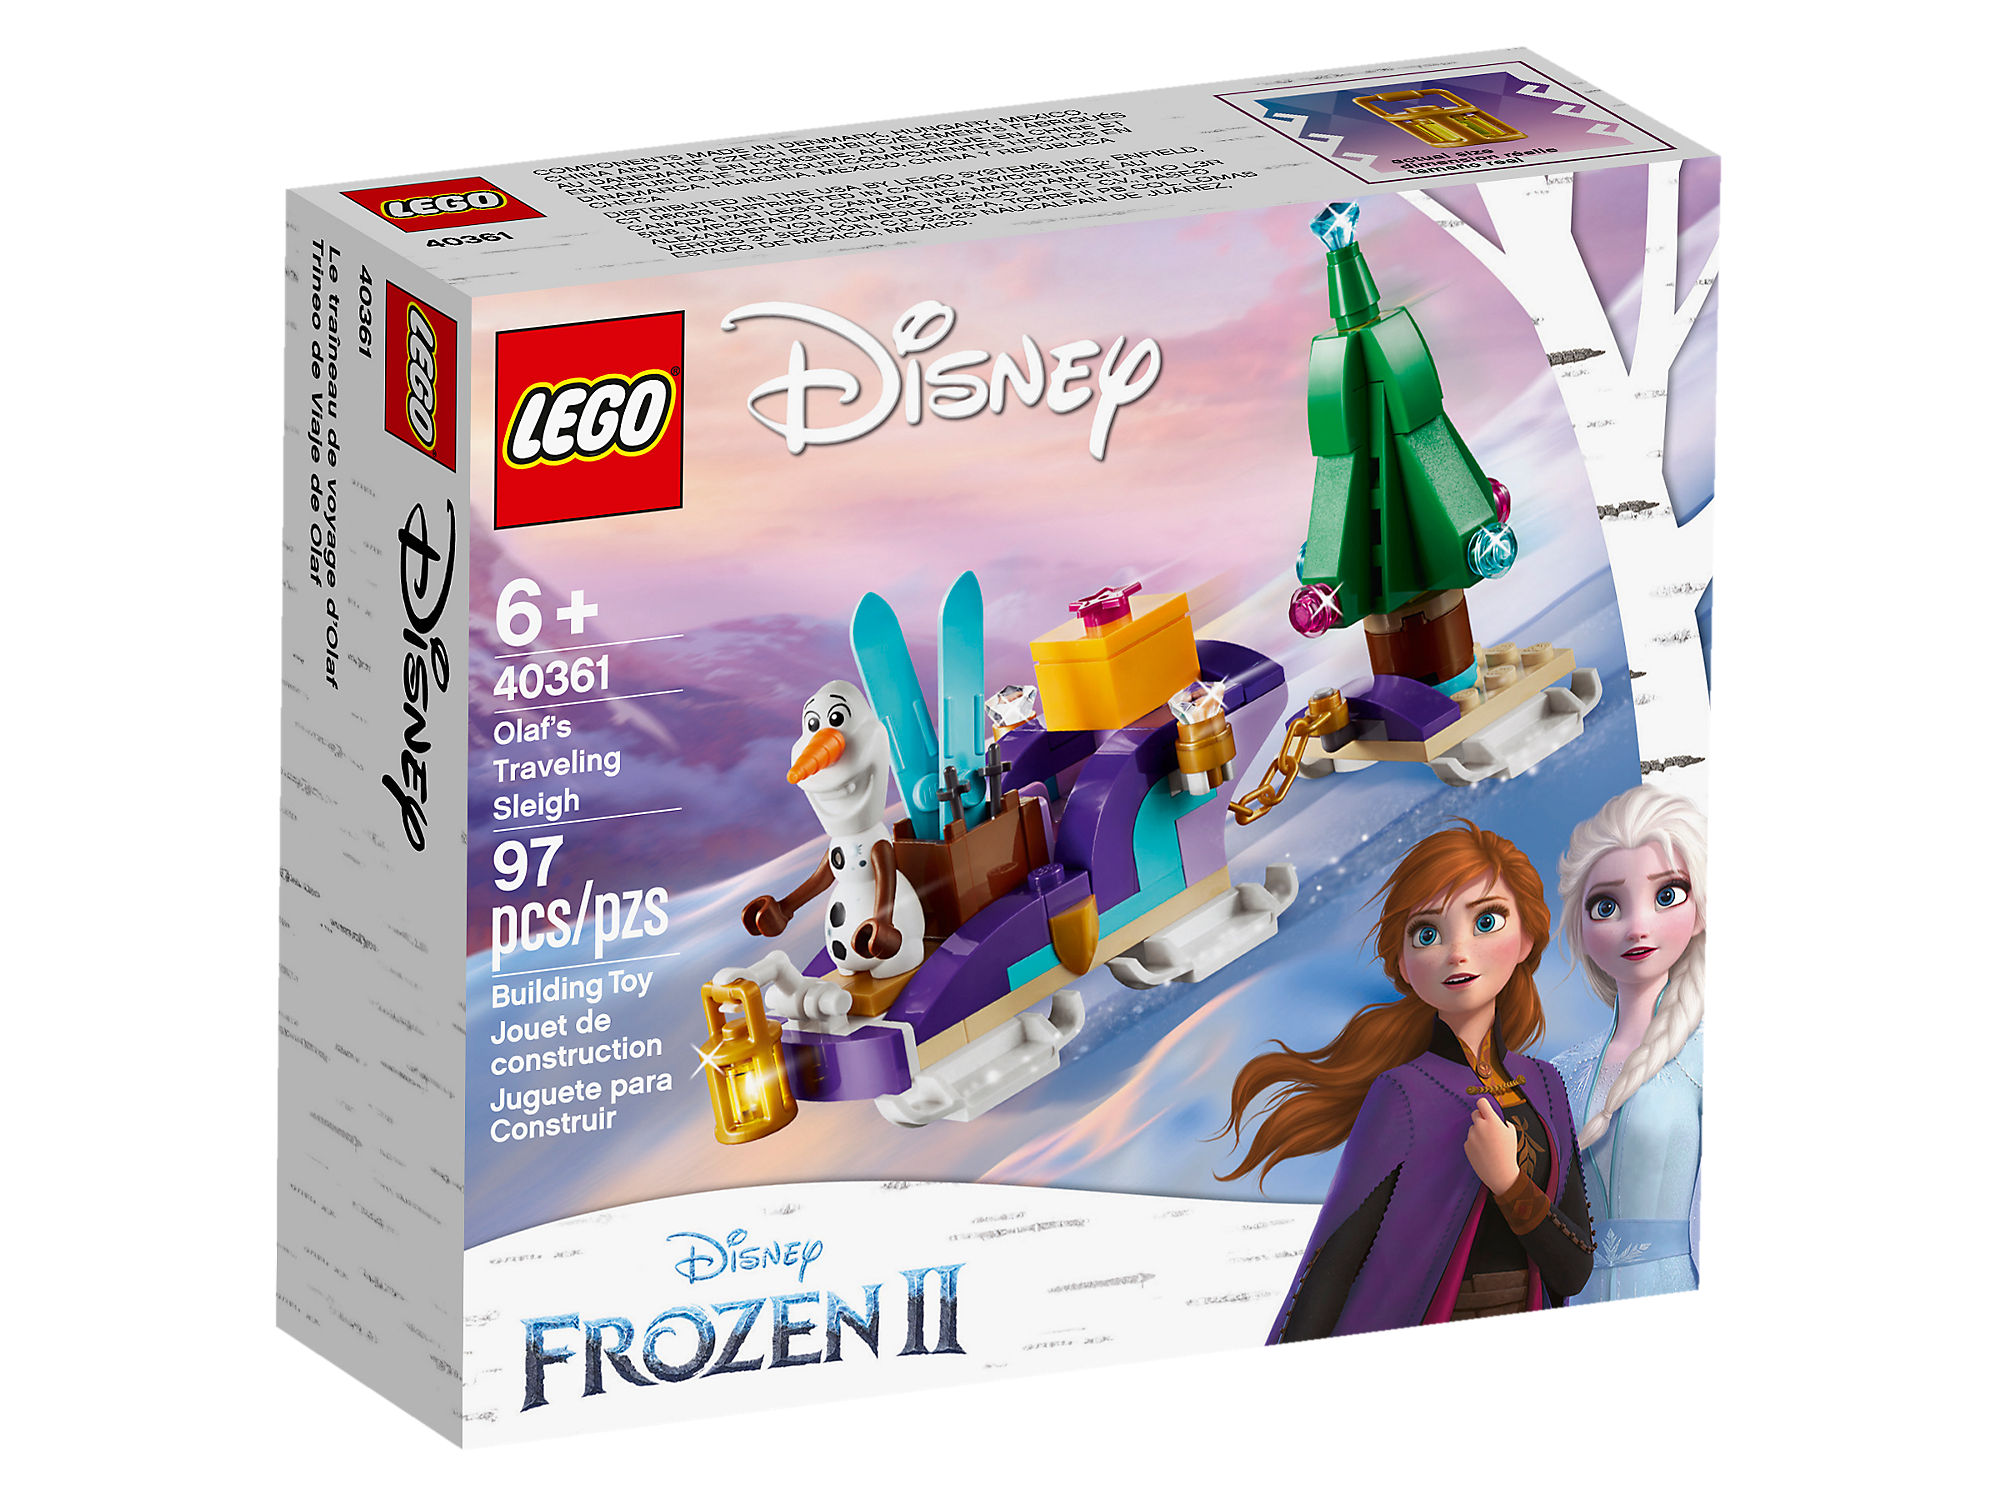 Bricker - Construction Toy by LEGO 40361 Olaf's Traveling Sleigh